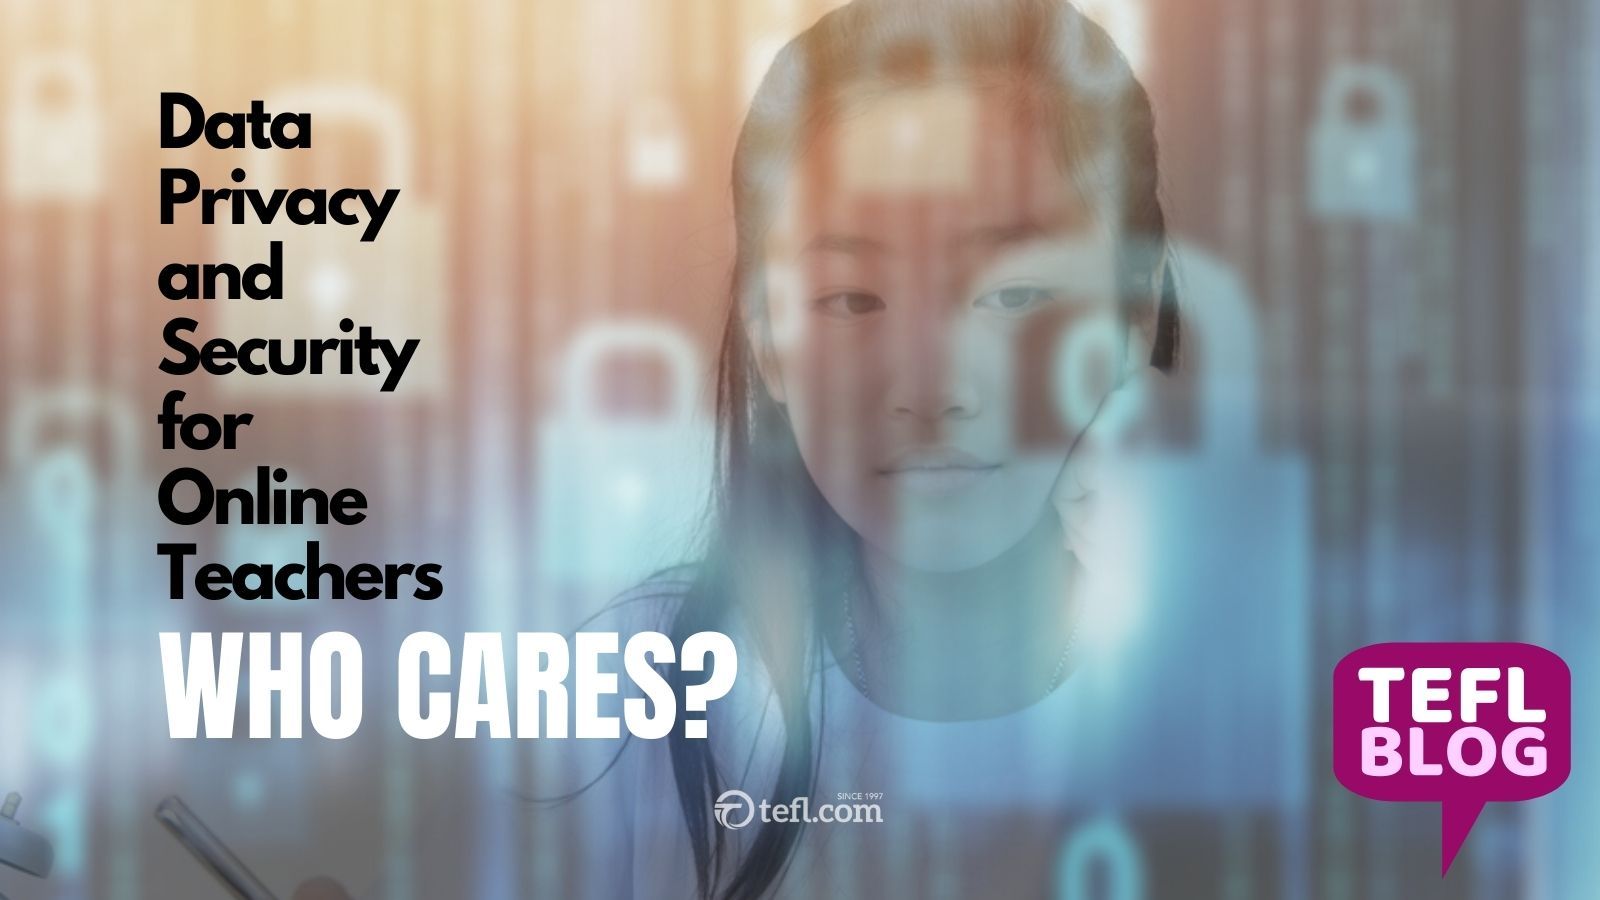 Data Privacy and Security for Online Teachers: Who Cares?